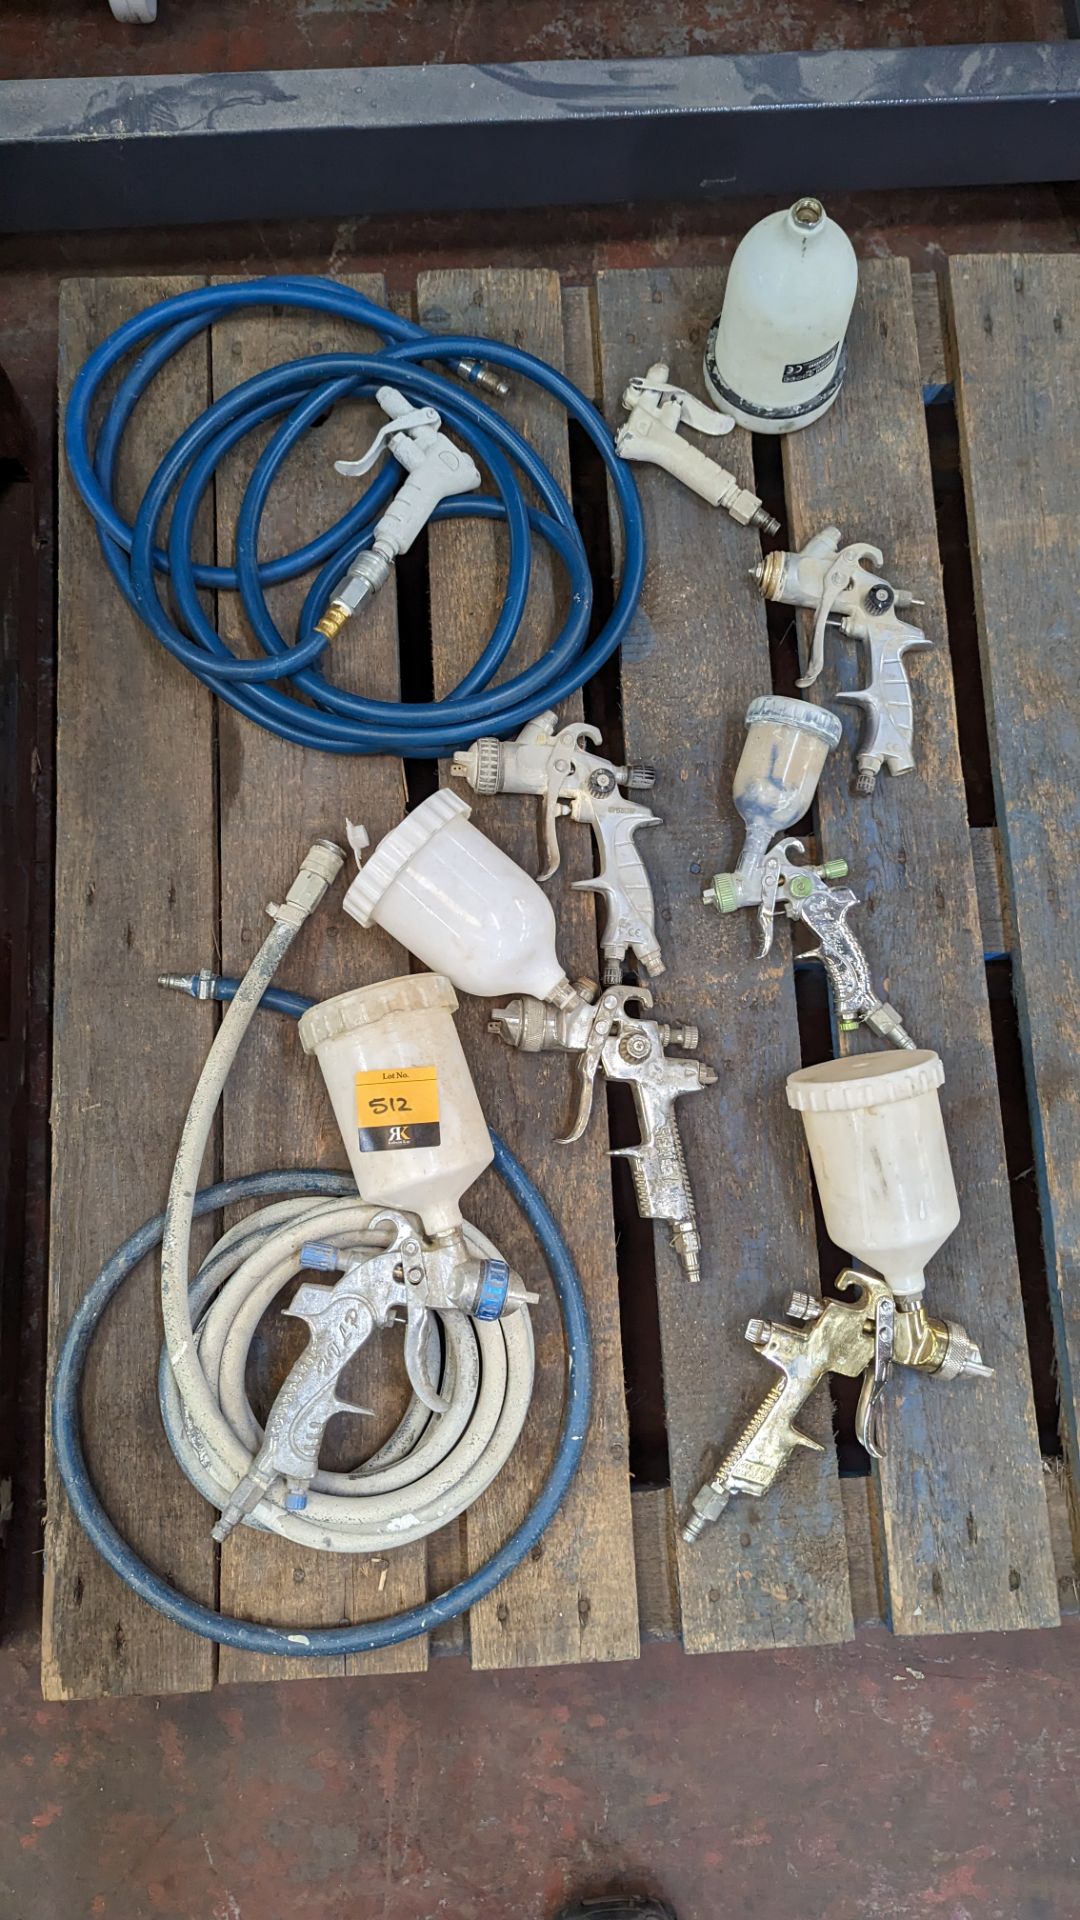 Quantity of spray paint guns & other related equipment as pictured - this lot in total comprises 8 s - Image 2 of 7